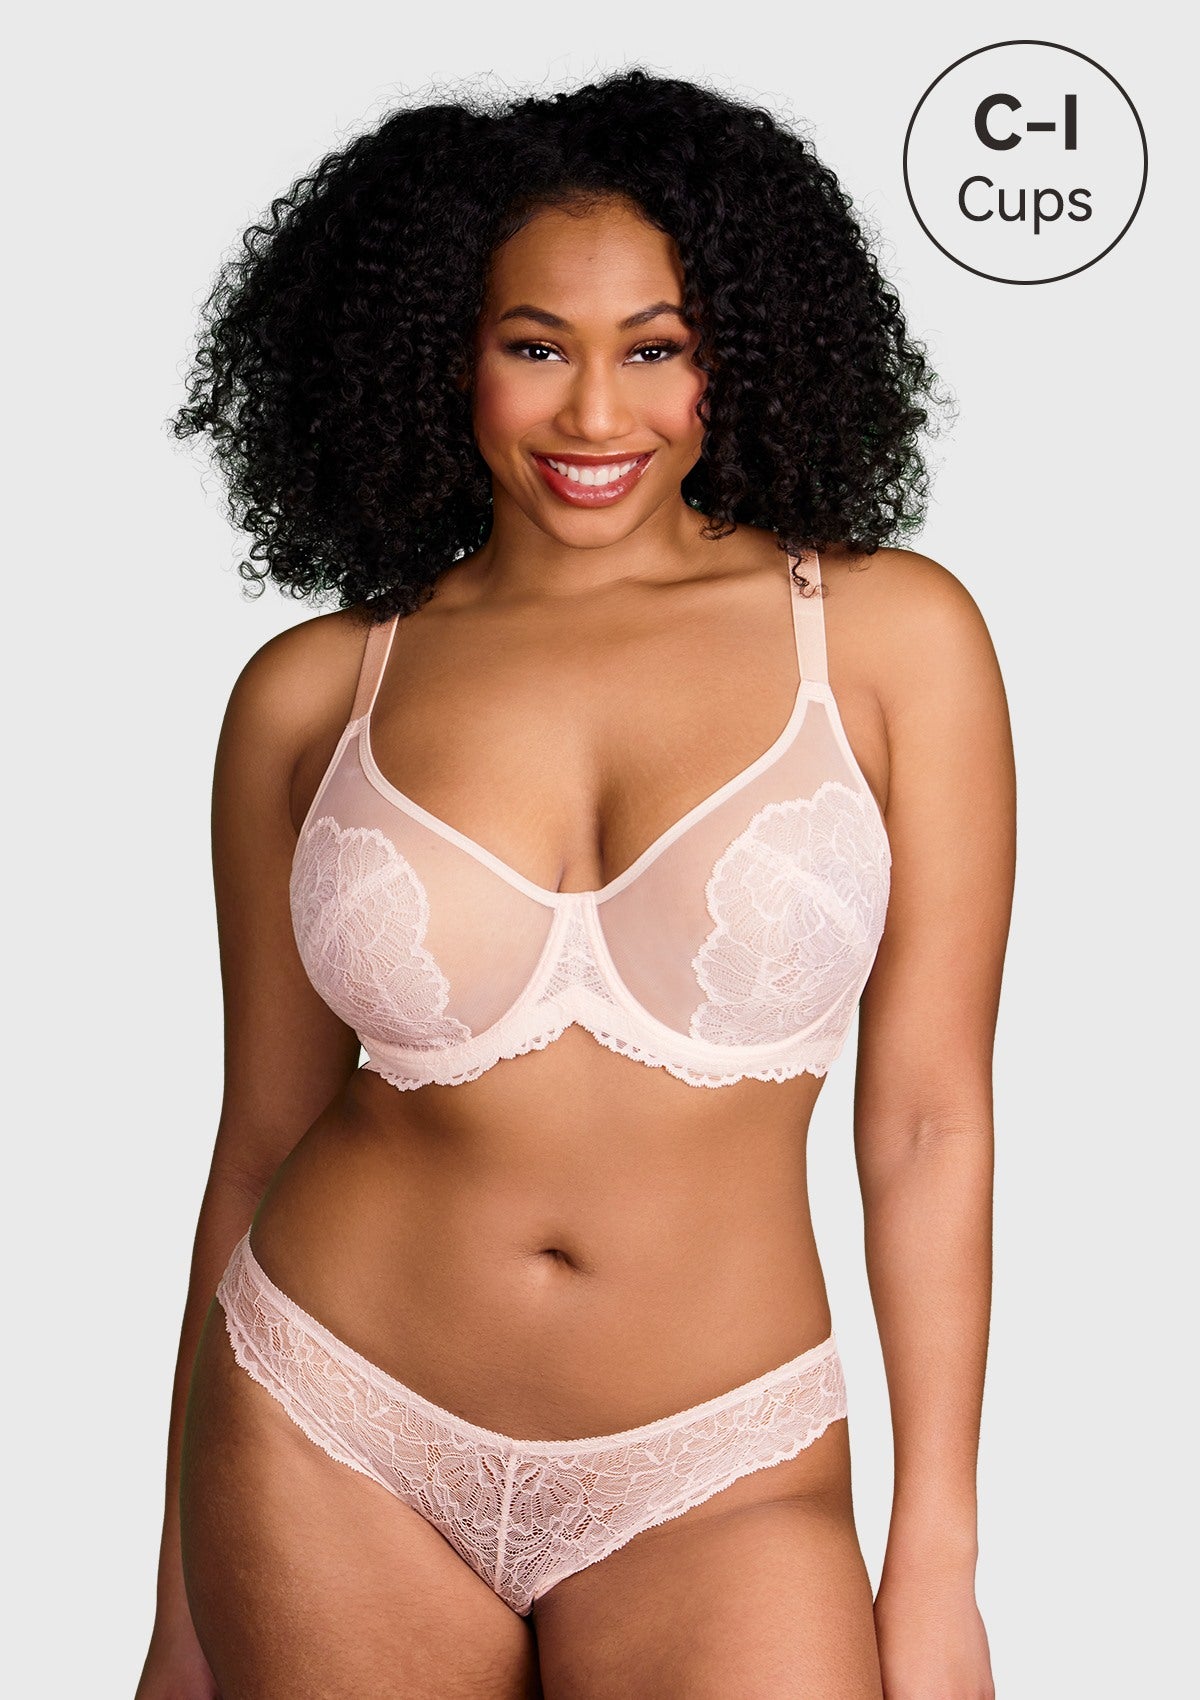 HSIA Blossom Sheer Lace Bra: Comfortable Underwire Bra For Big Busts - Dusty Peach / 36 / G